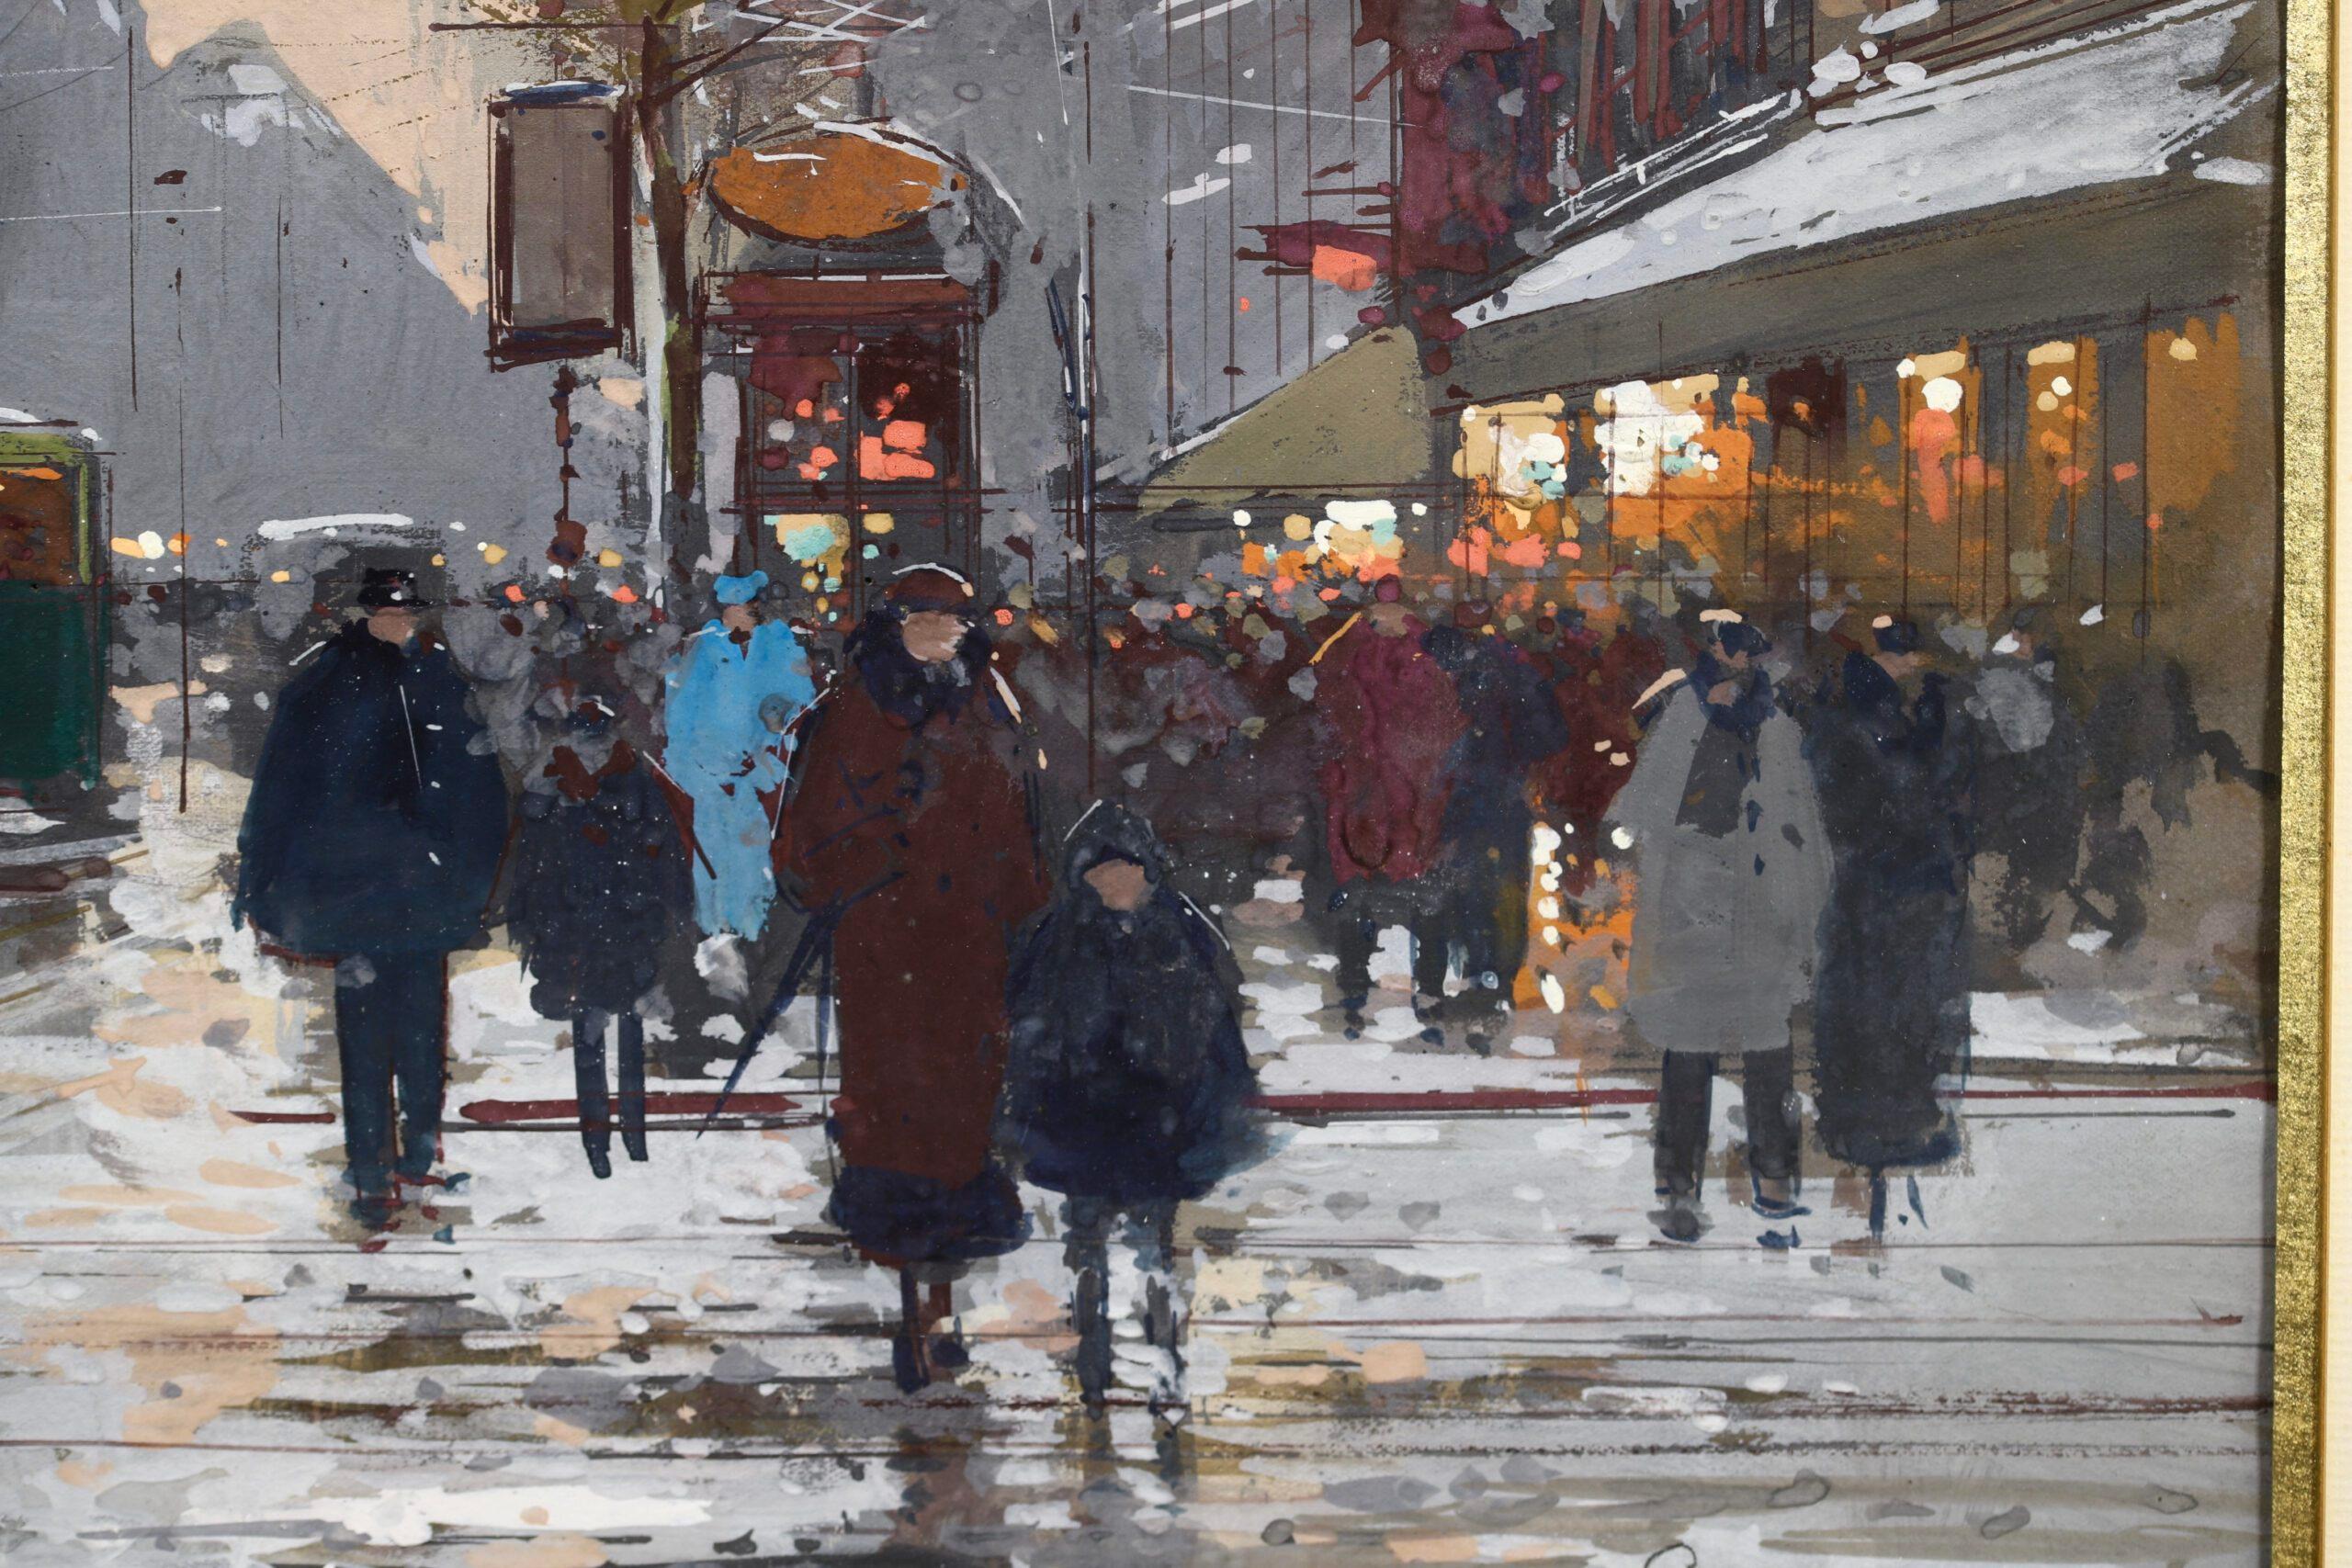 Winter - Porte St Denis - Impressionist Cityscape Painting by Edouard Cortes 2